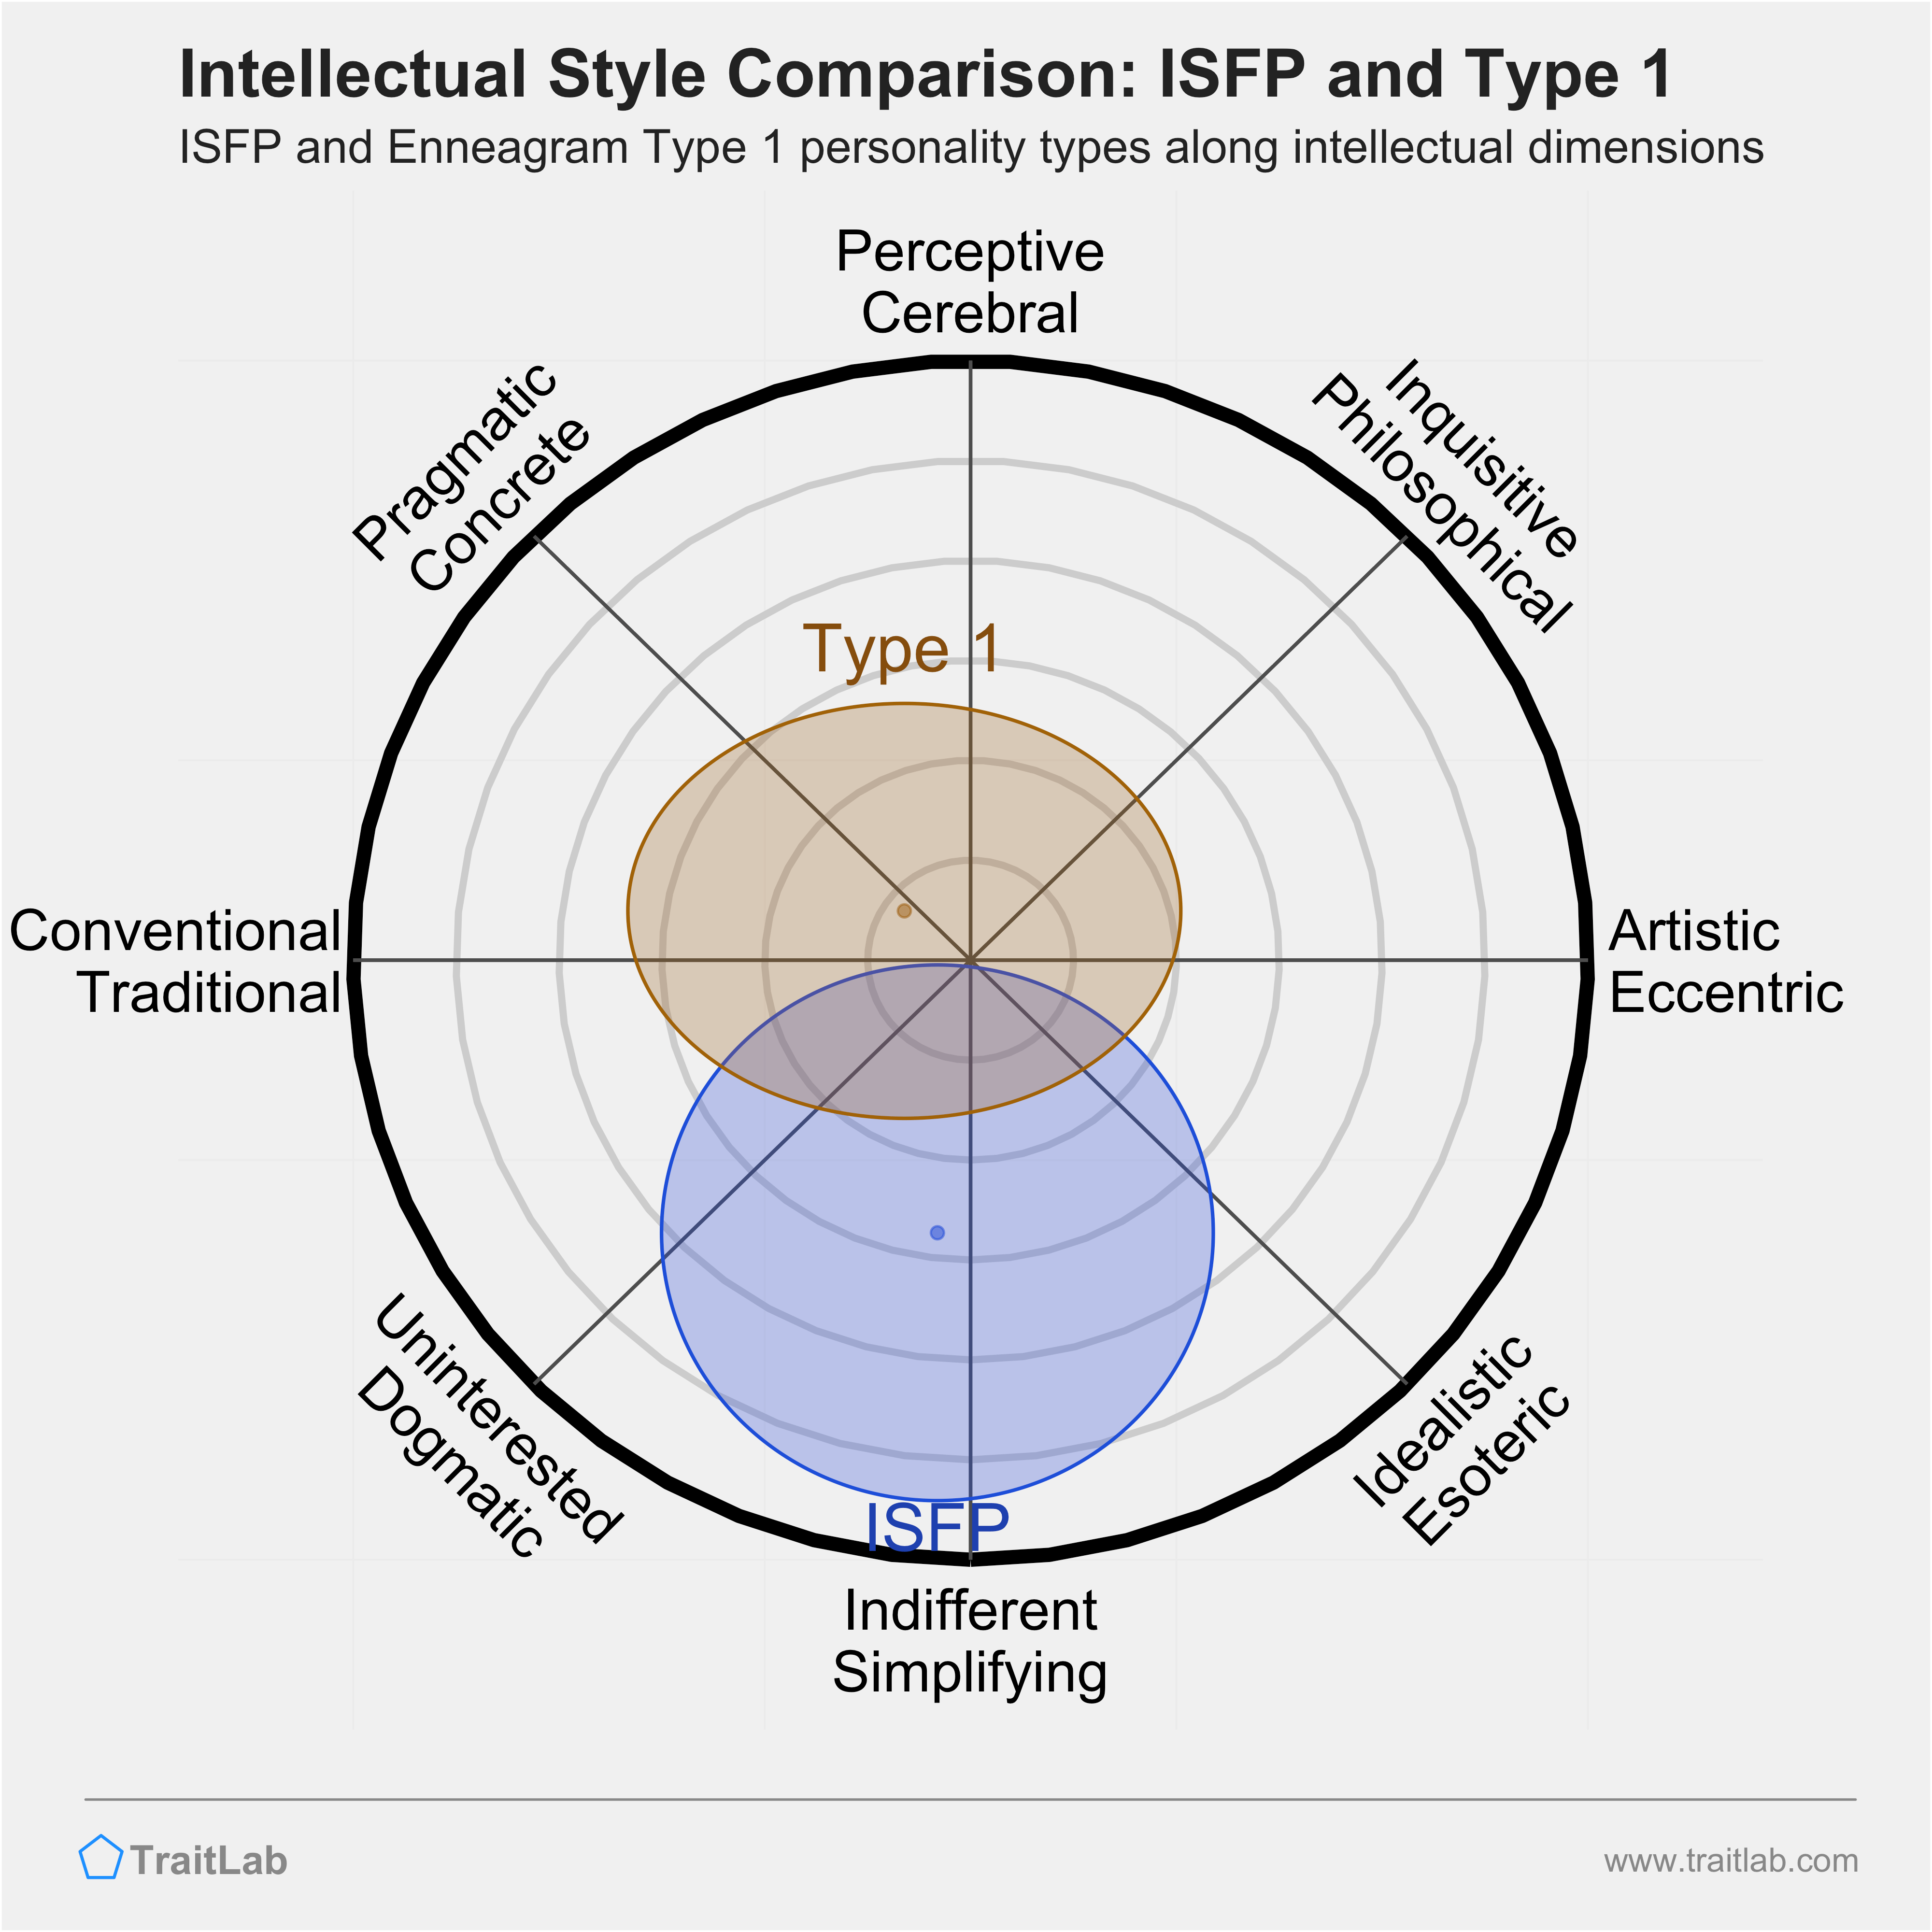 ISFP and Type 1 comparison across intellectual dimensions